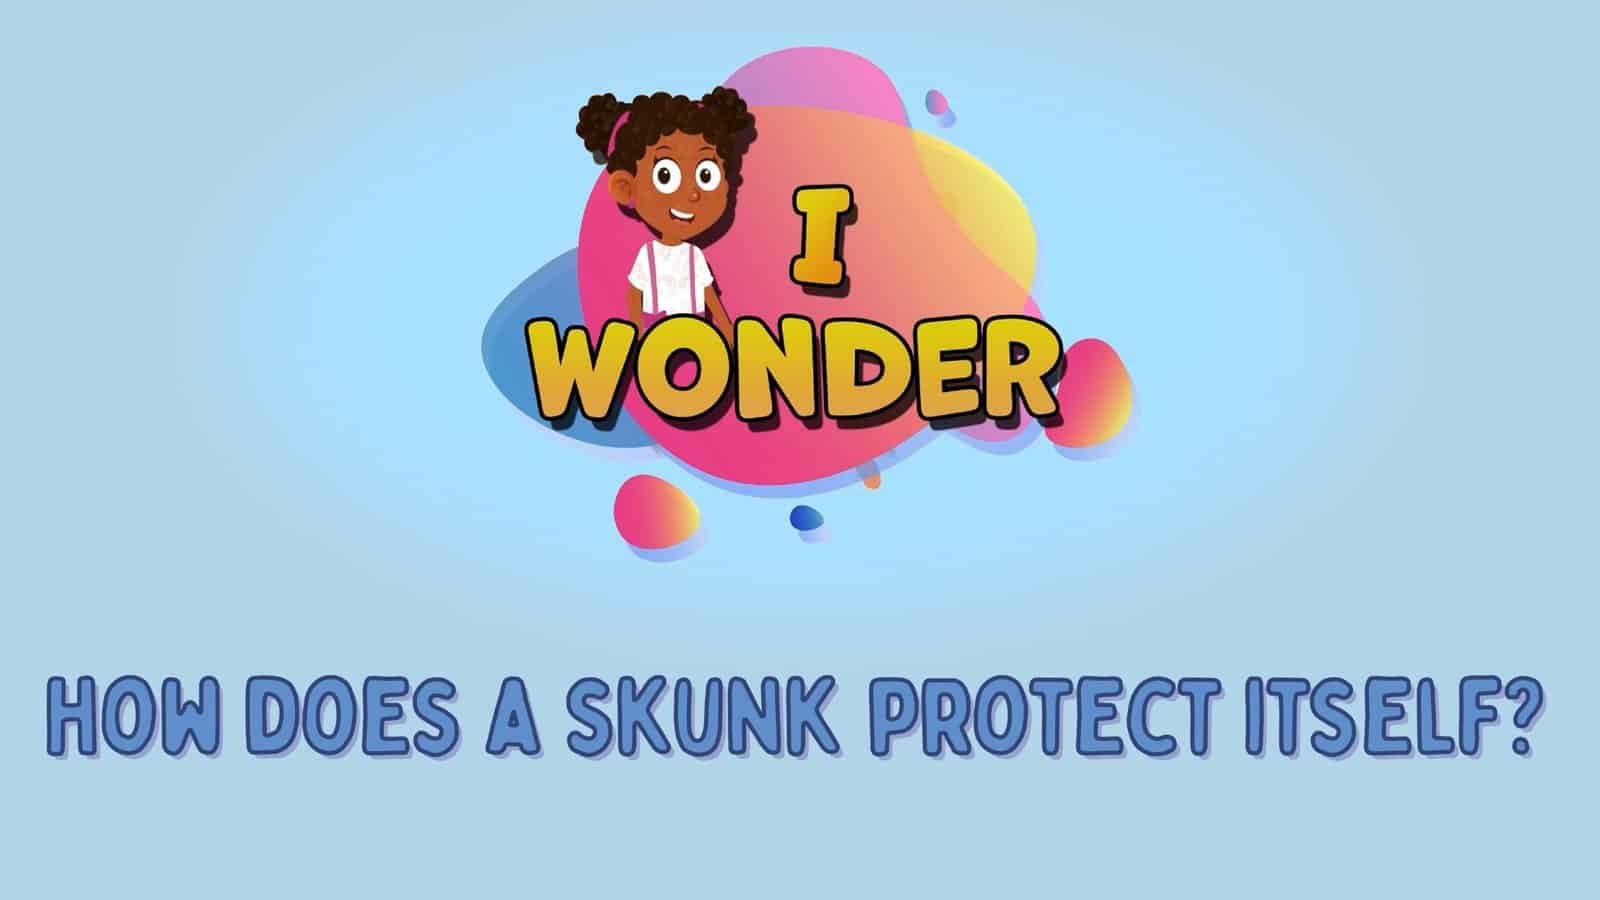 How Does A Skunk Protect Itself?